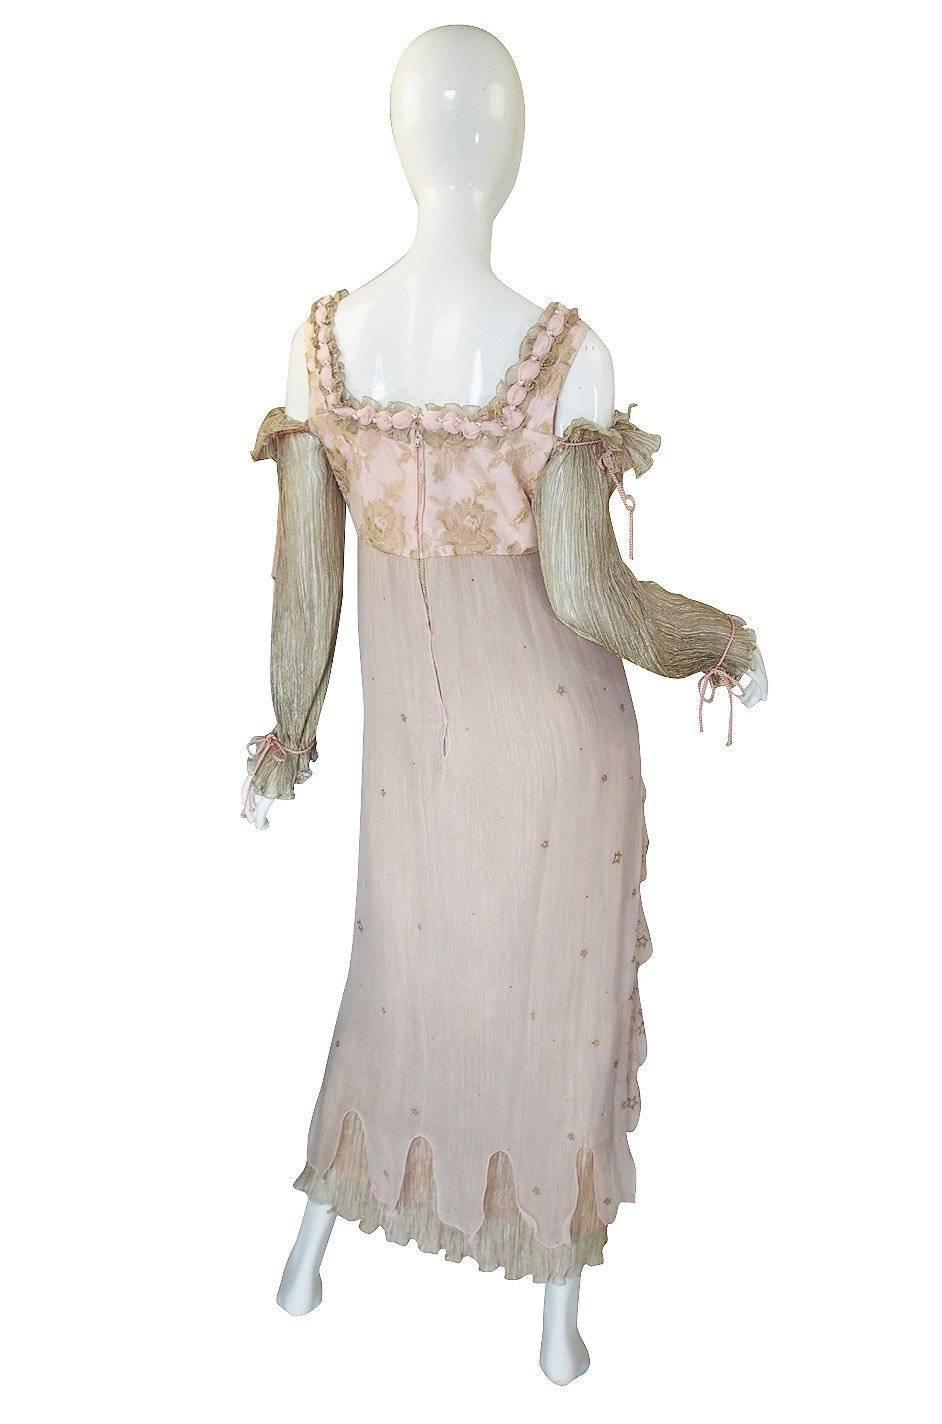 A stunning, hand painted gown from Zandra Rhodes that was most likely a custom order and it is not a far stretch of the imagination to think that it could have been used as a wedding gown even! It has a delicious Medieval feel to it with its cut out